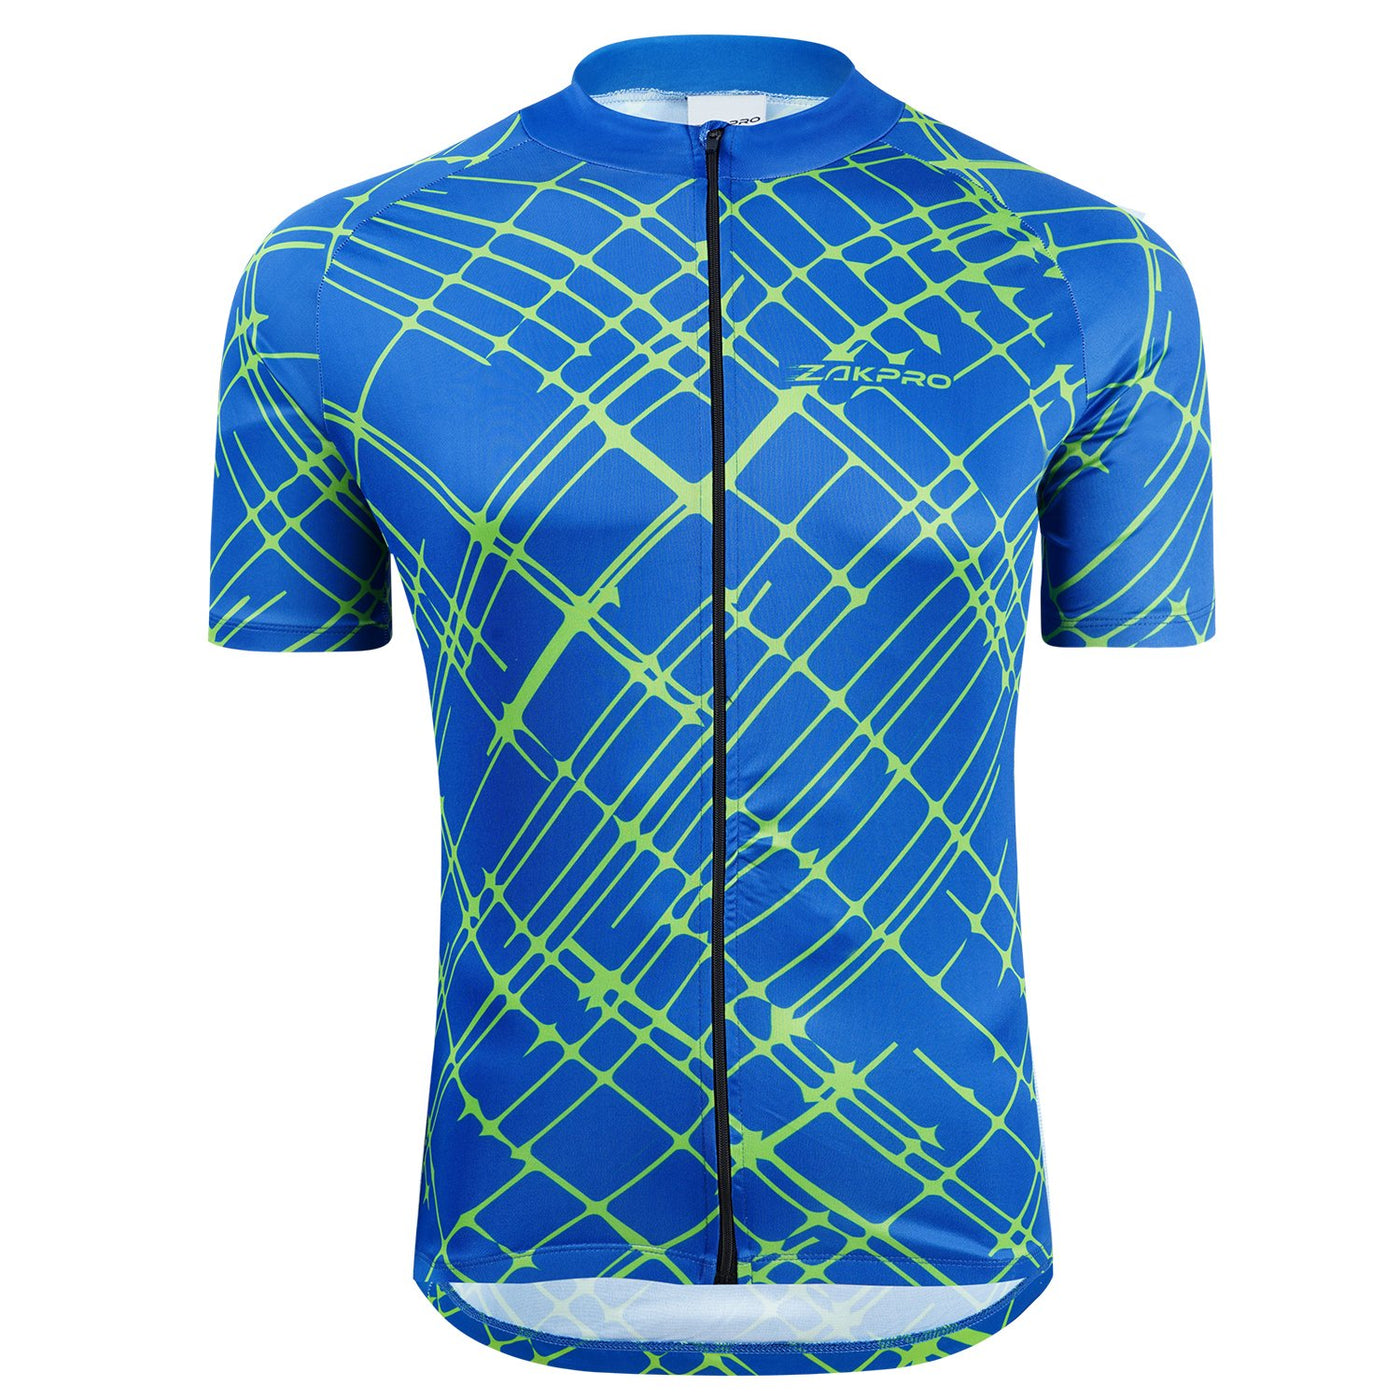 ZAKPRO - Cycling Jersey, Kuhl - Z003 - Cyclop.in